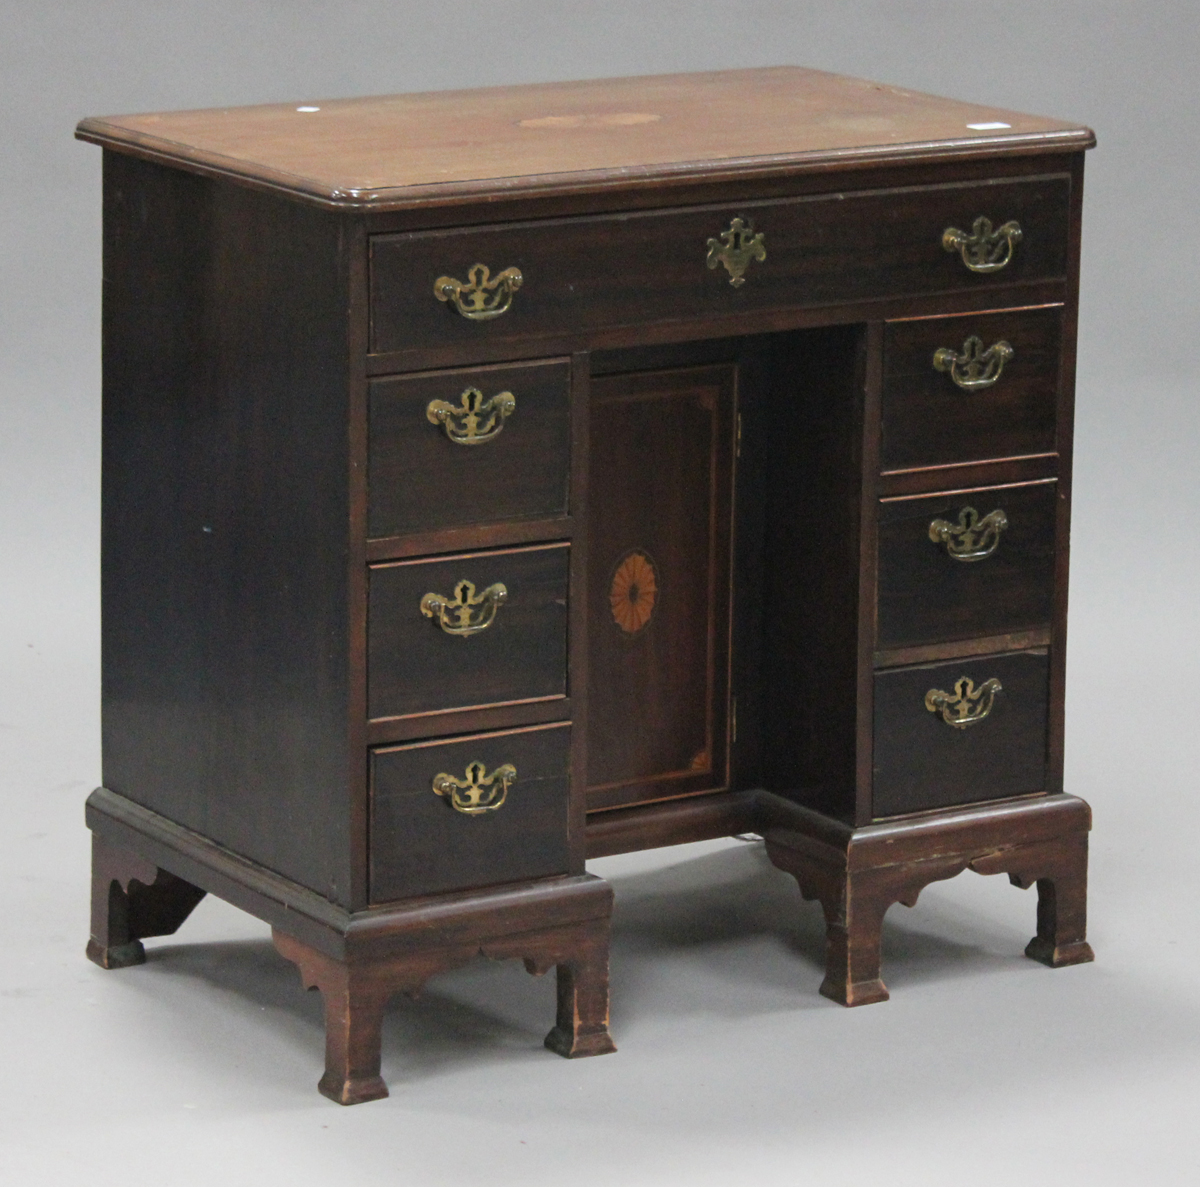 A 19th century mahogany kneehole desk, the moulded top inlaid with an oval fan patera above seven